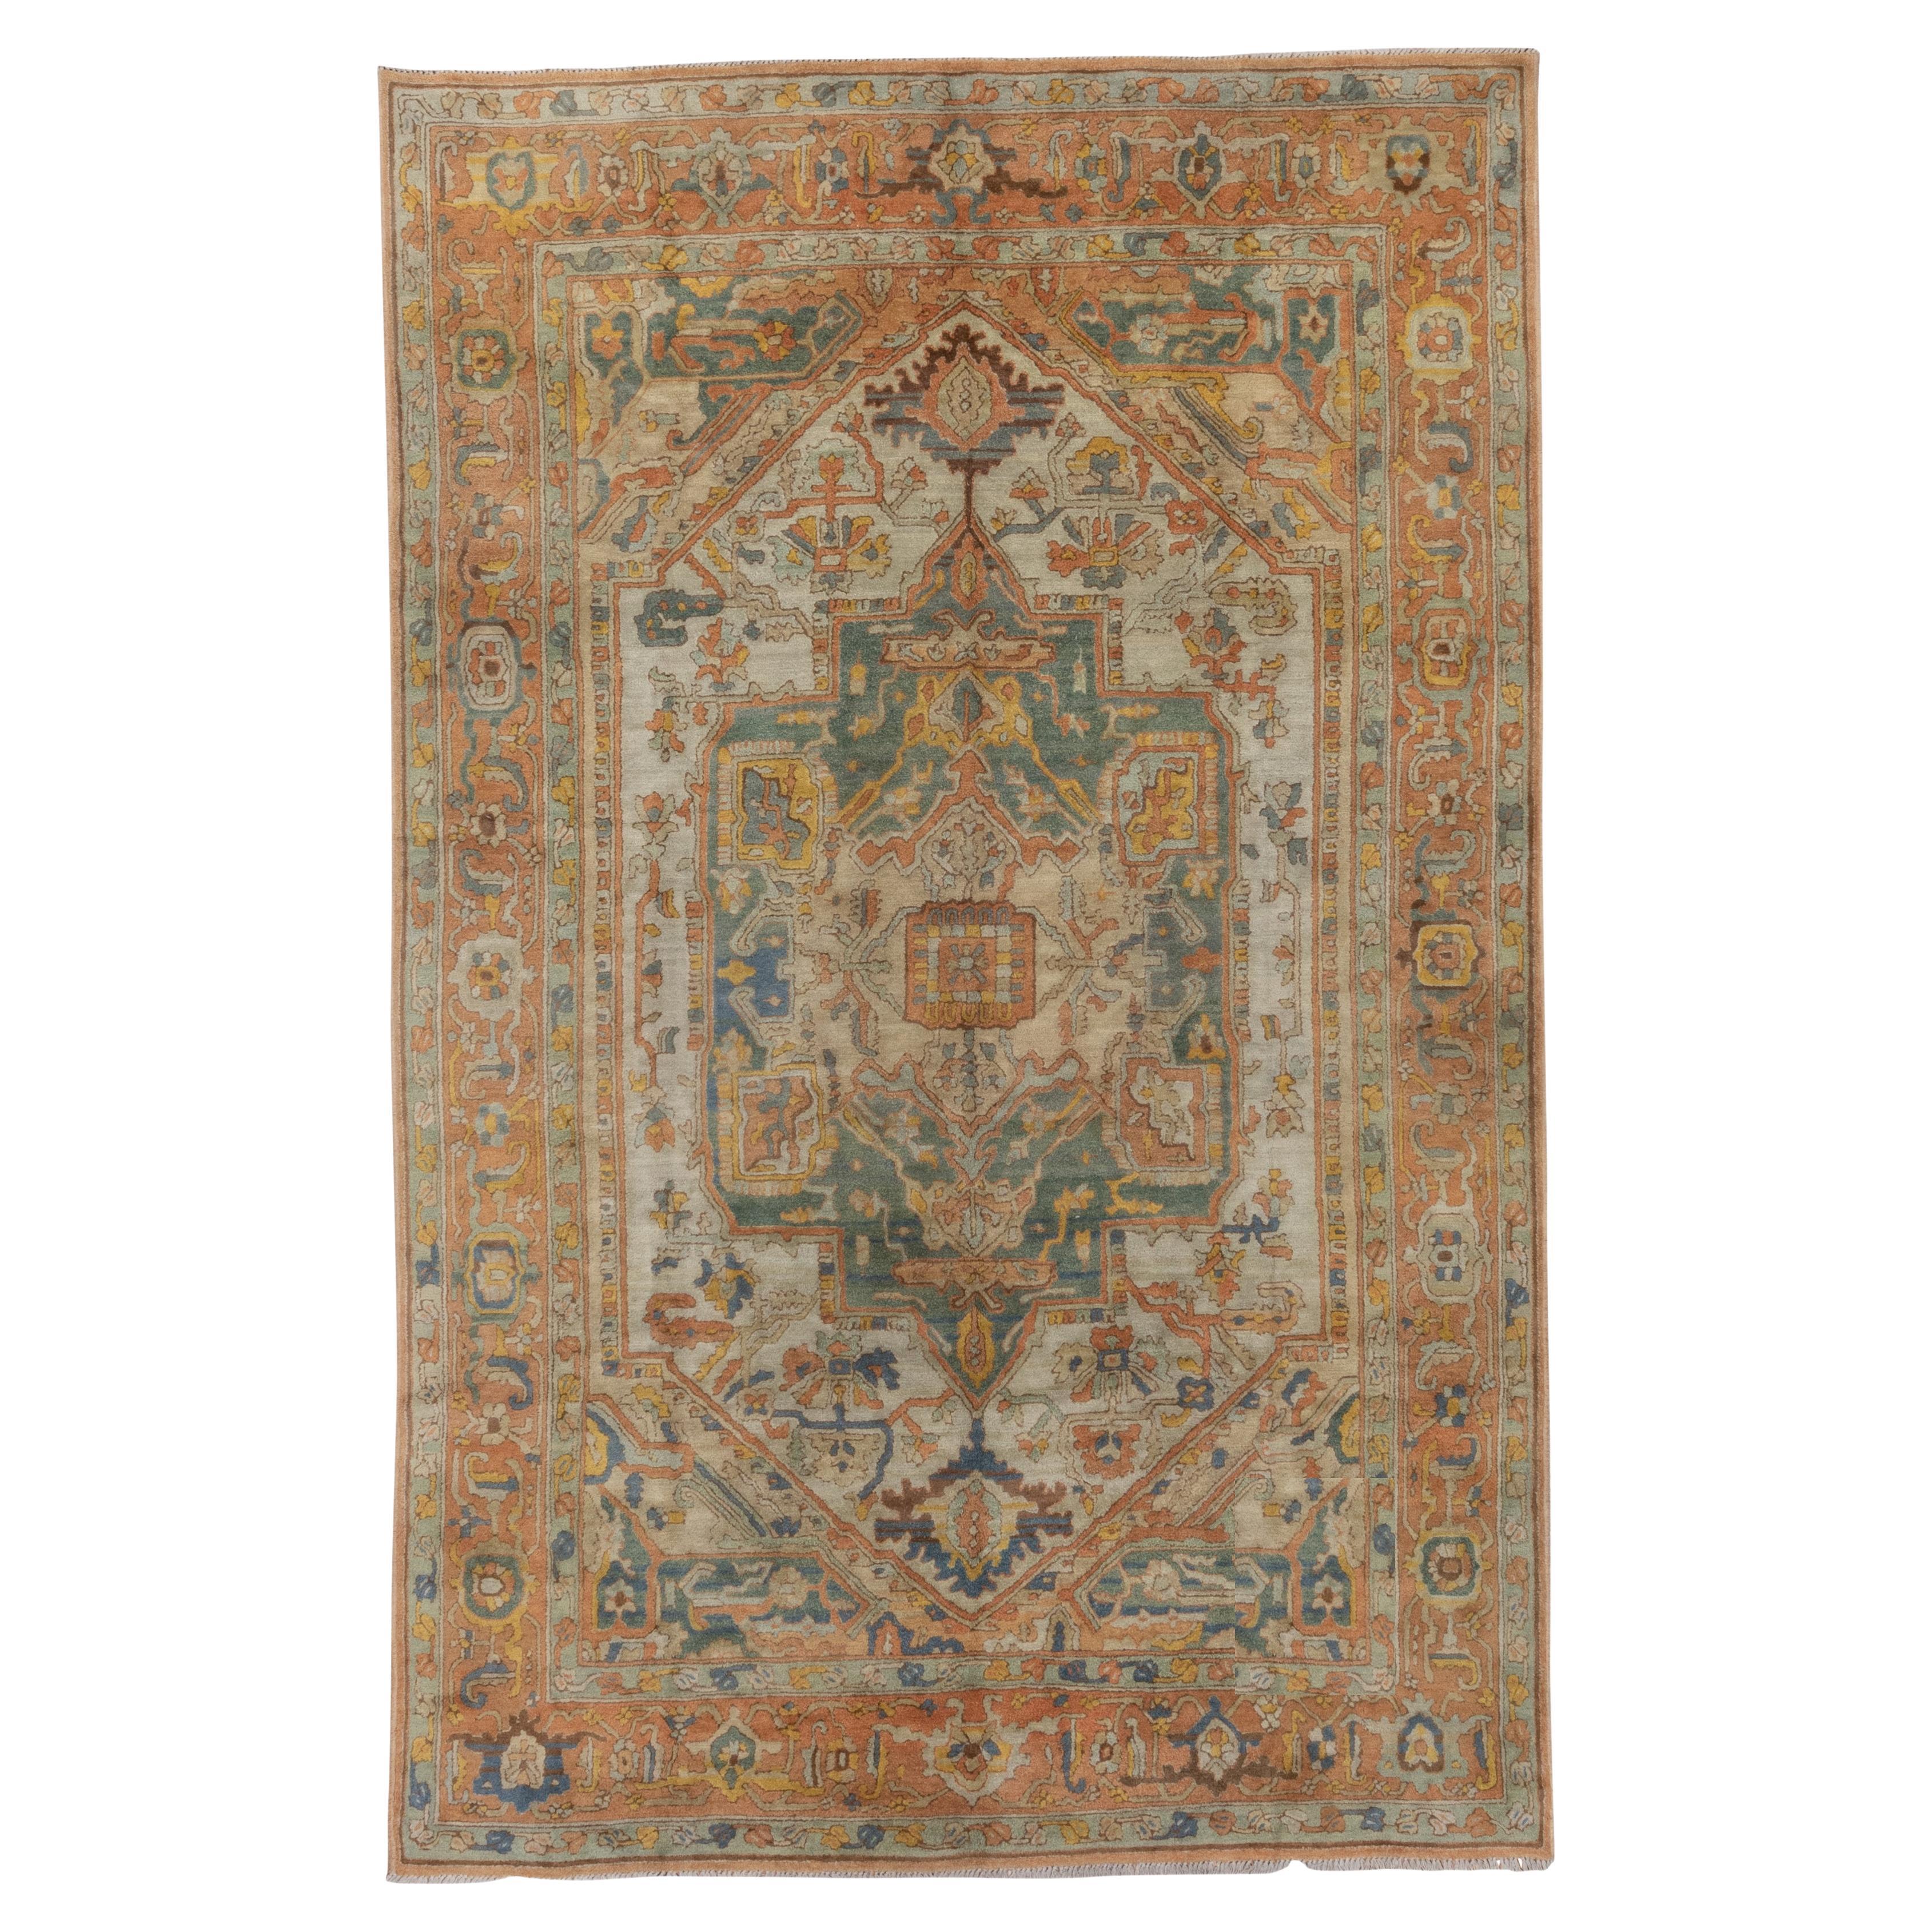 Hooked Rug in Ancient Orange with Elaborate Central Medallion